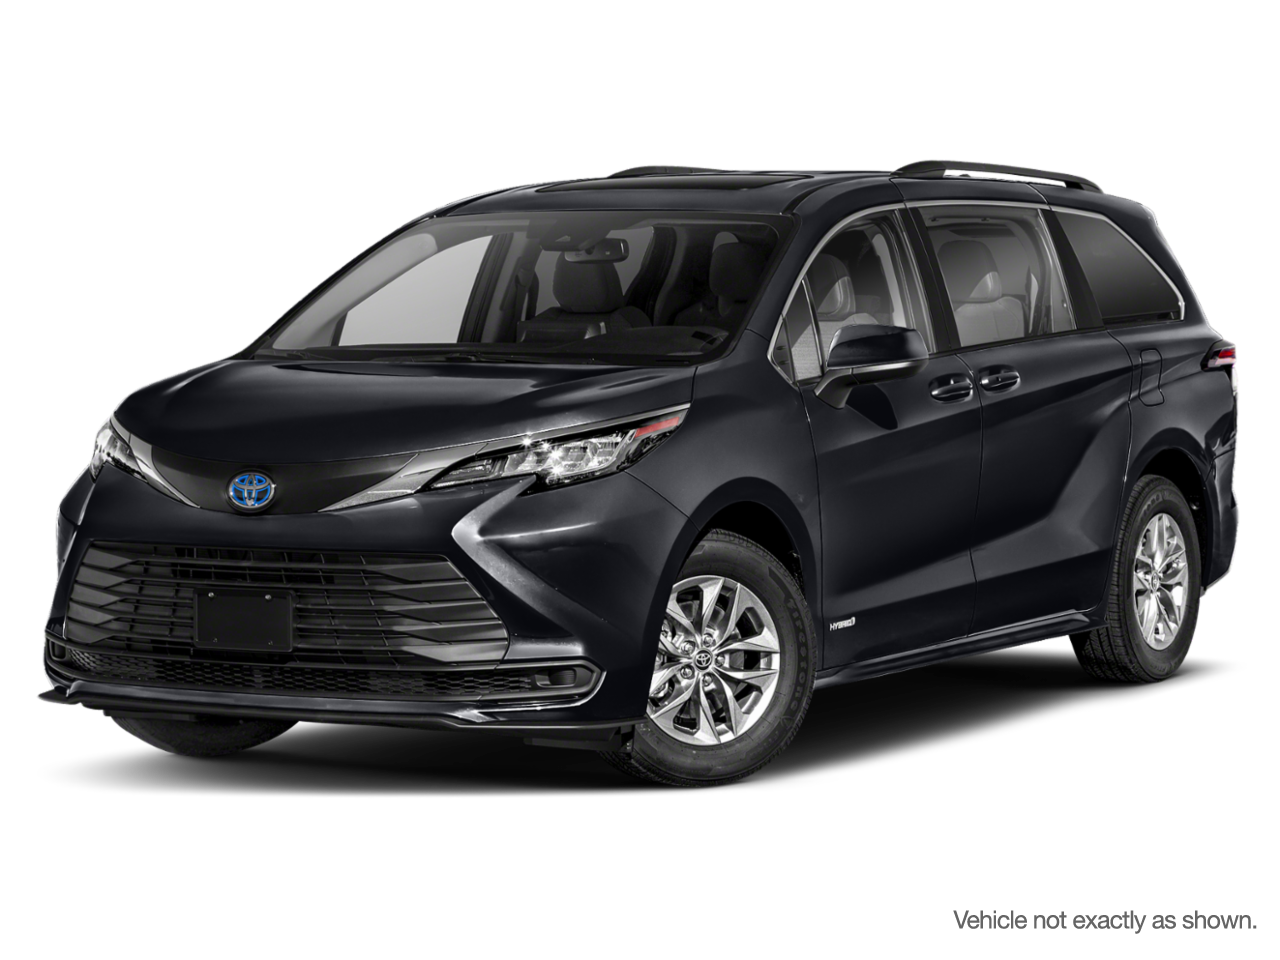 2021 Toyota Sienna Sienna LE 8-Pass |LE PACKAGE|